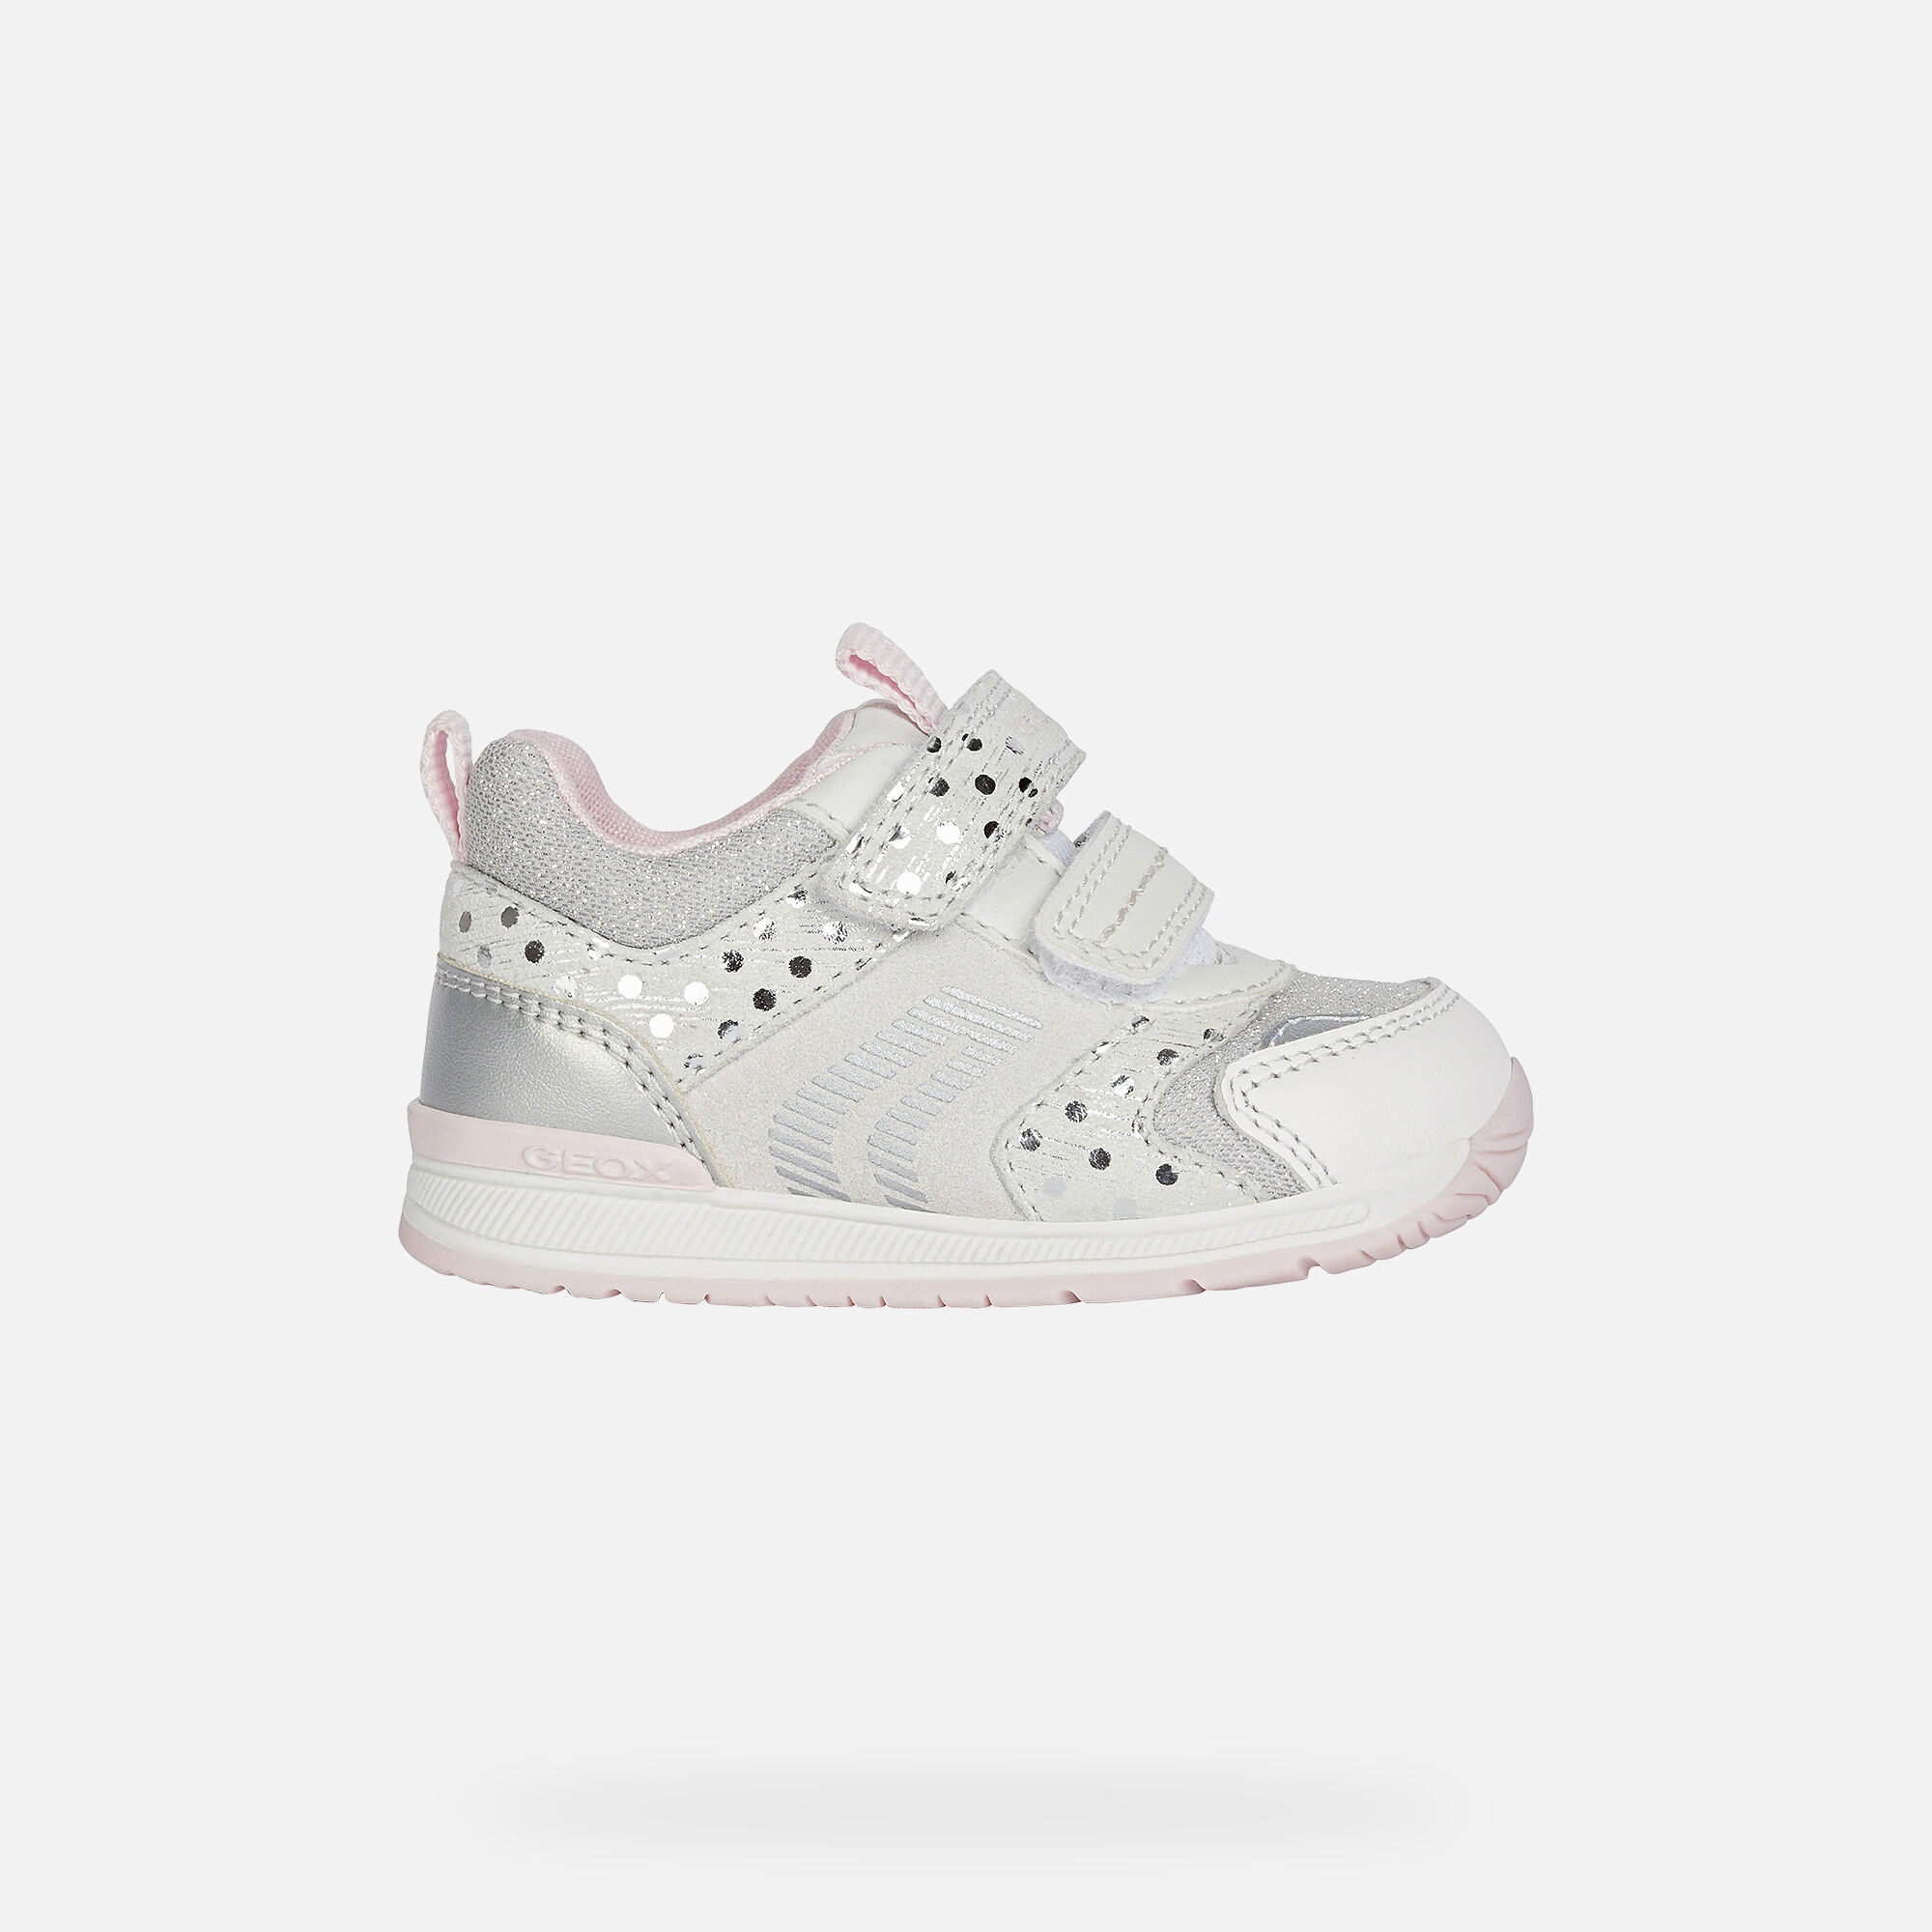 geox toddler shoes